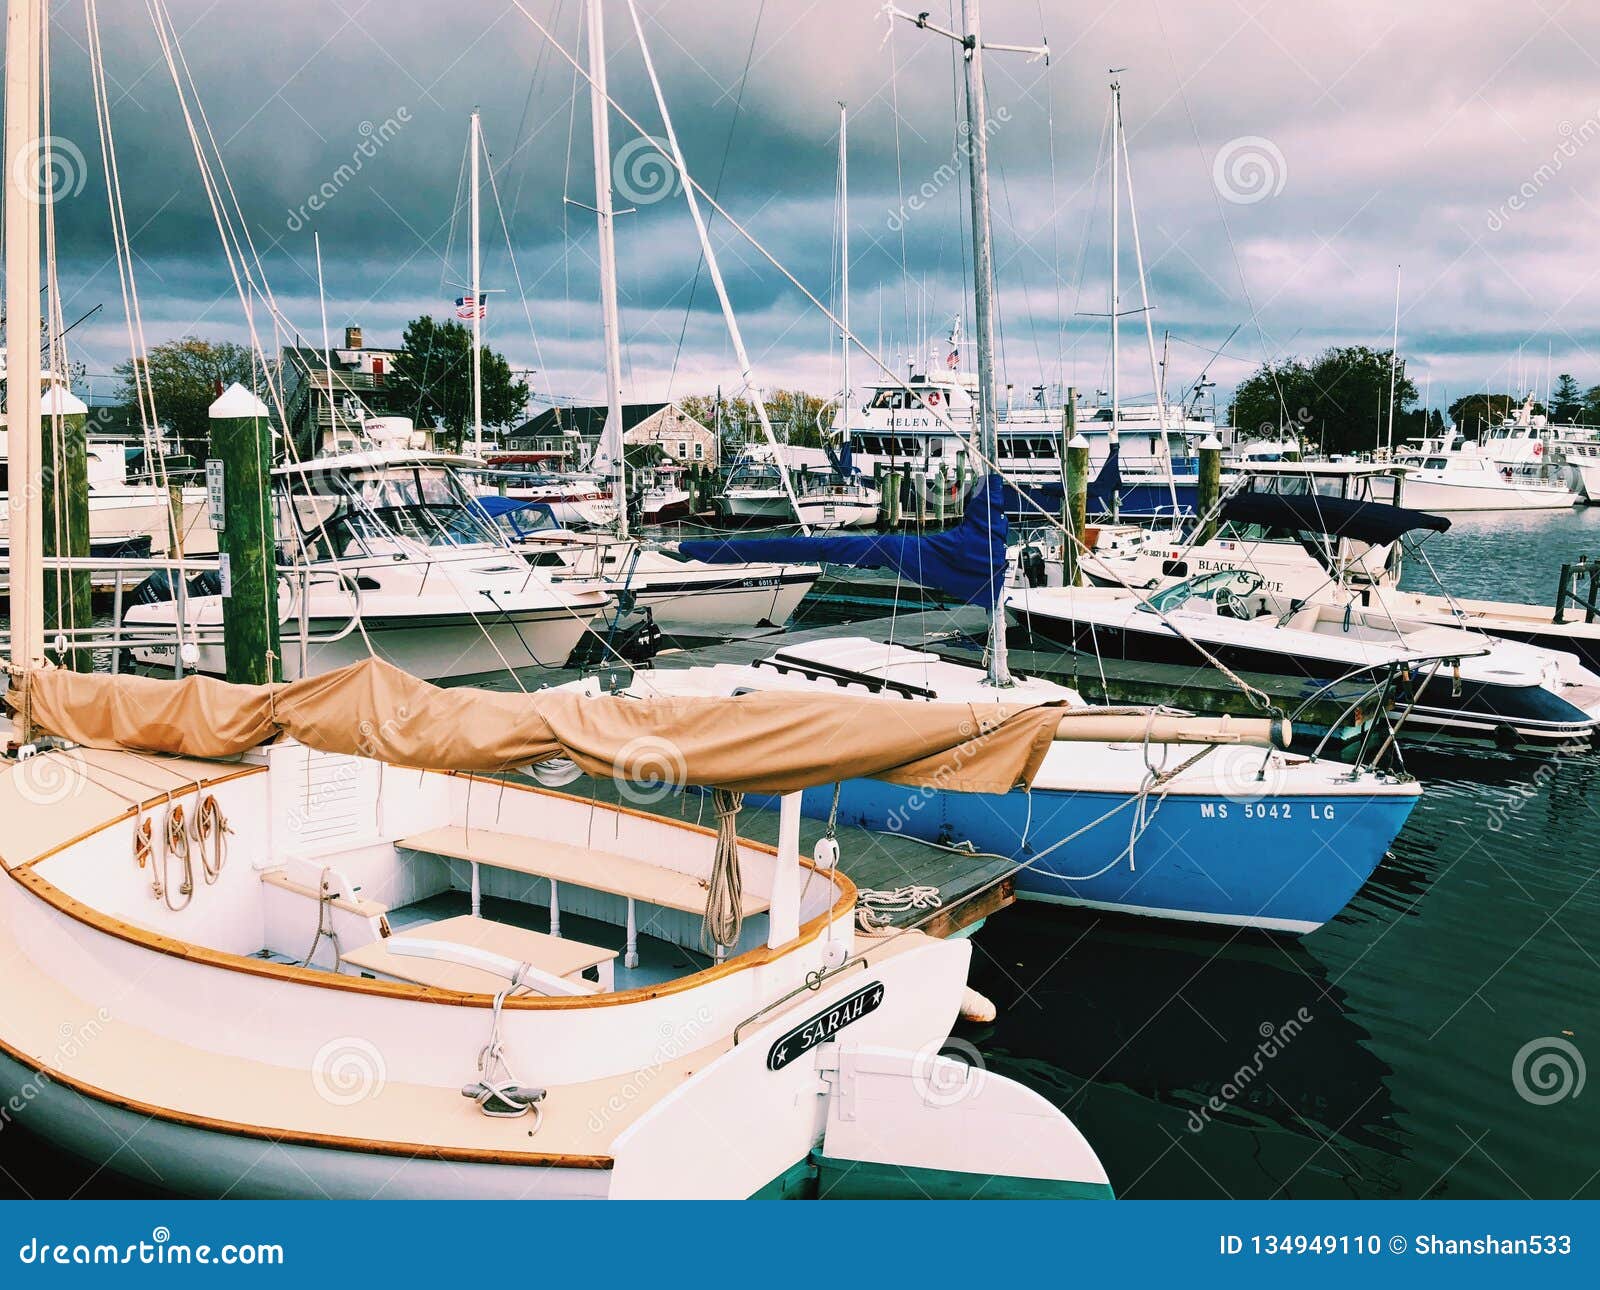 The Boats Docked at the Wharf in Hyannis Editorial Image - Image of ...